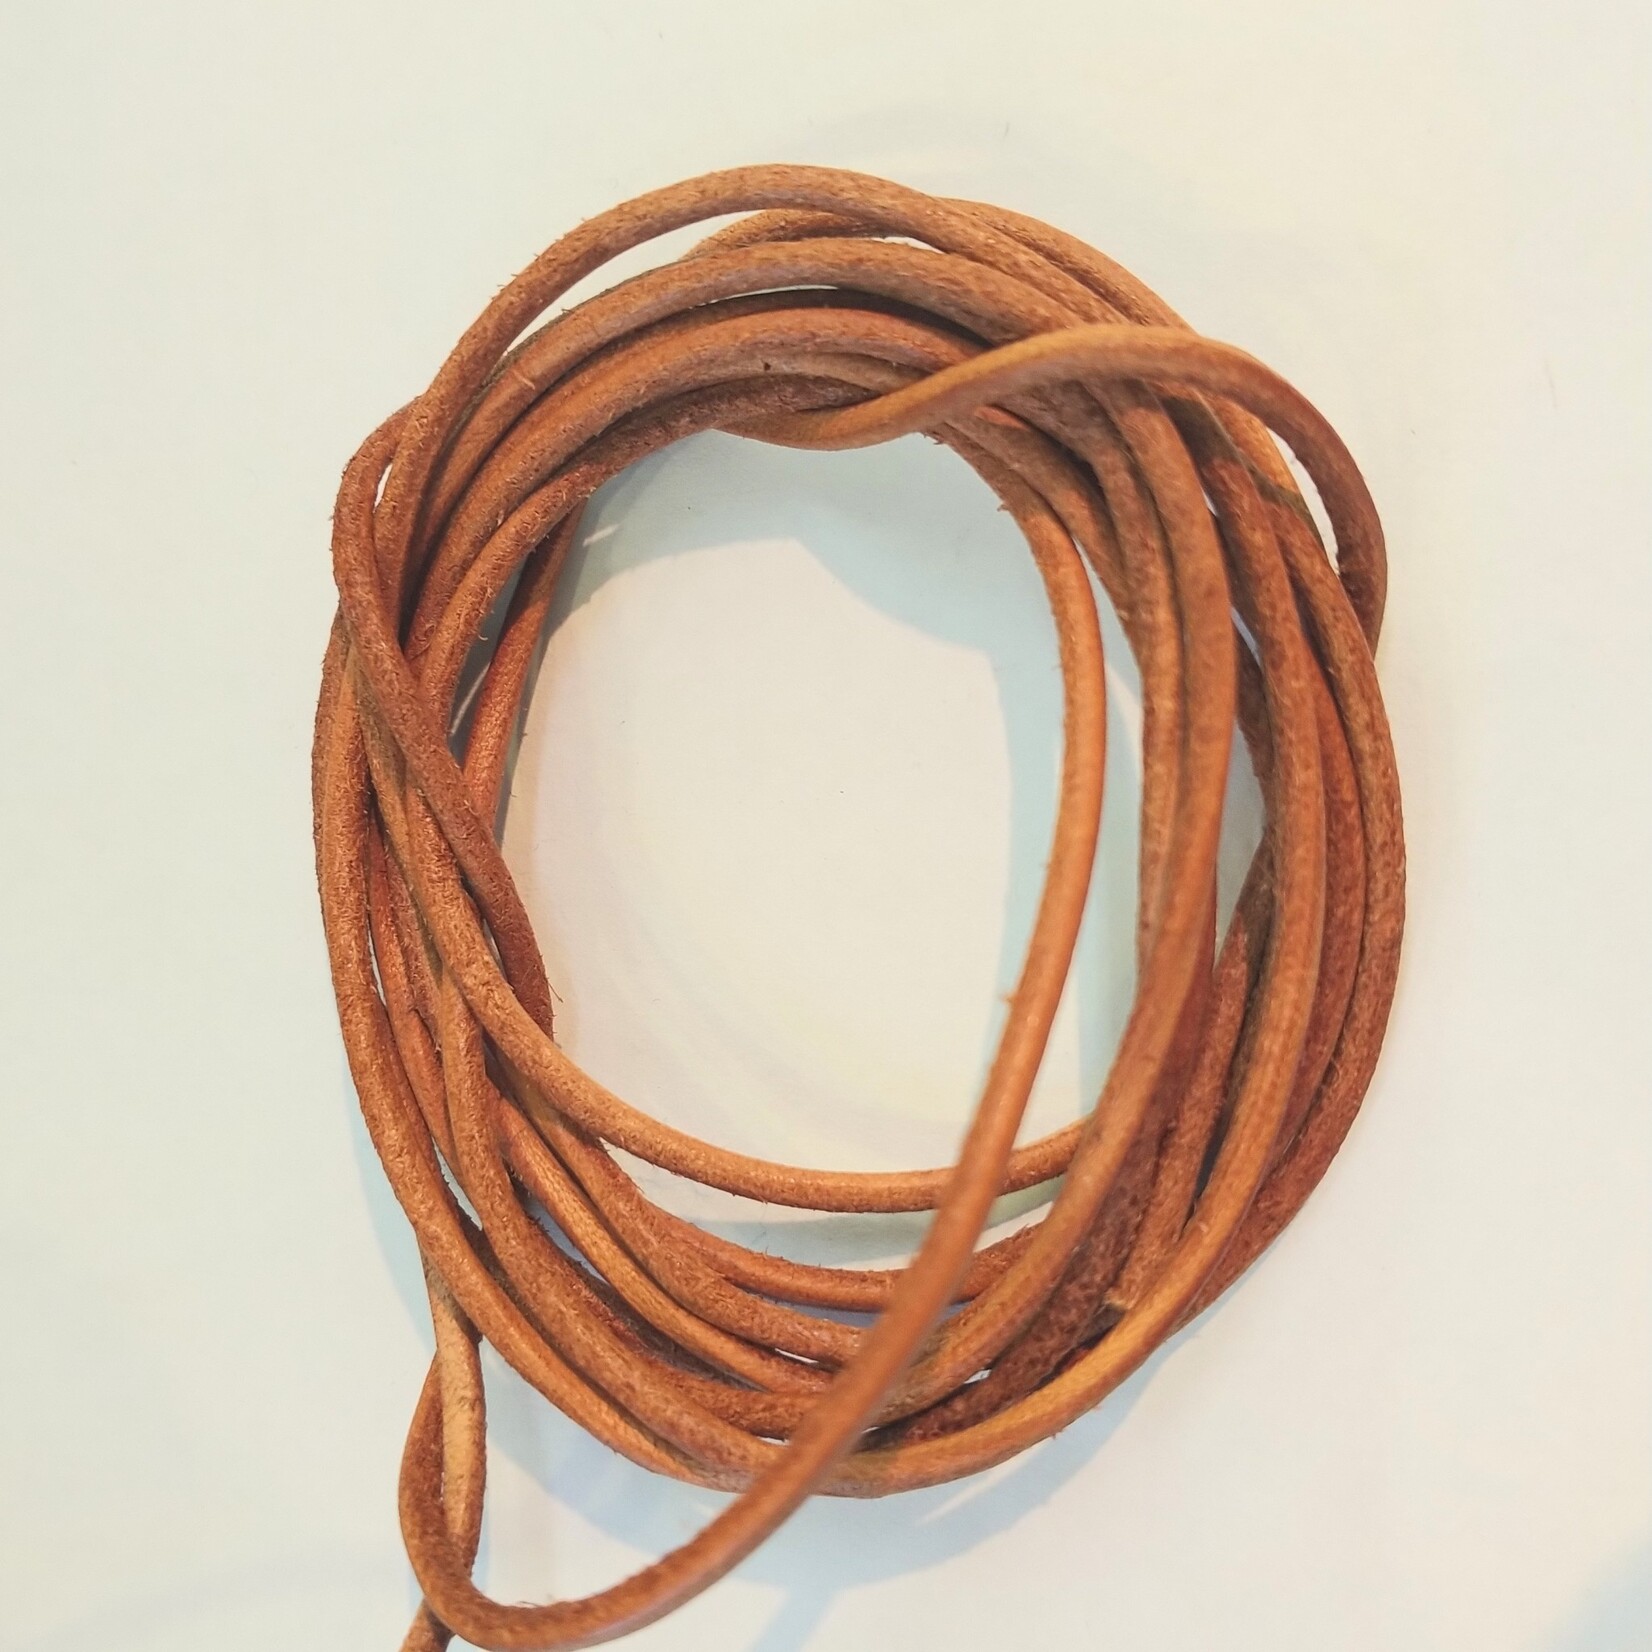 Leather 1.5mm Round Cord Natural Brown - 1 foot